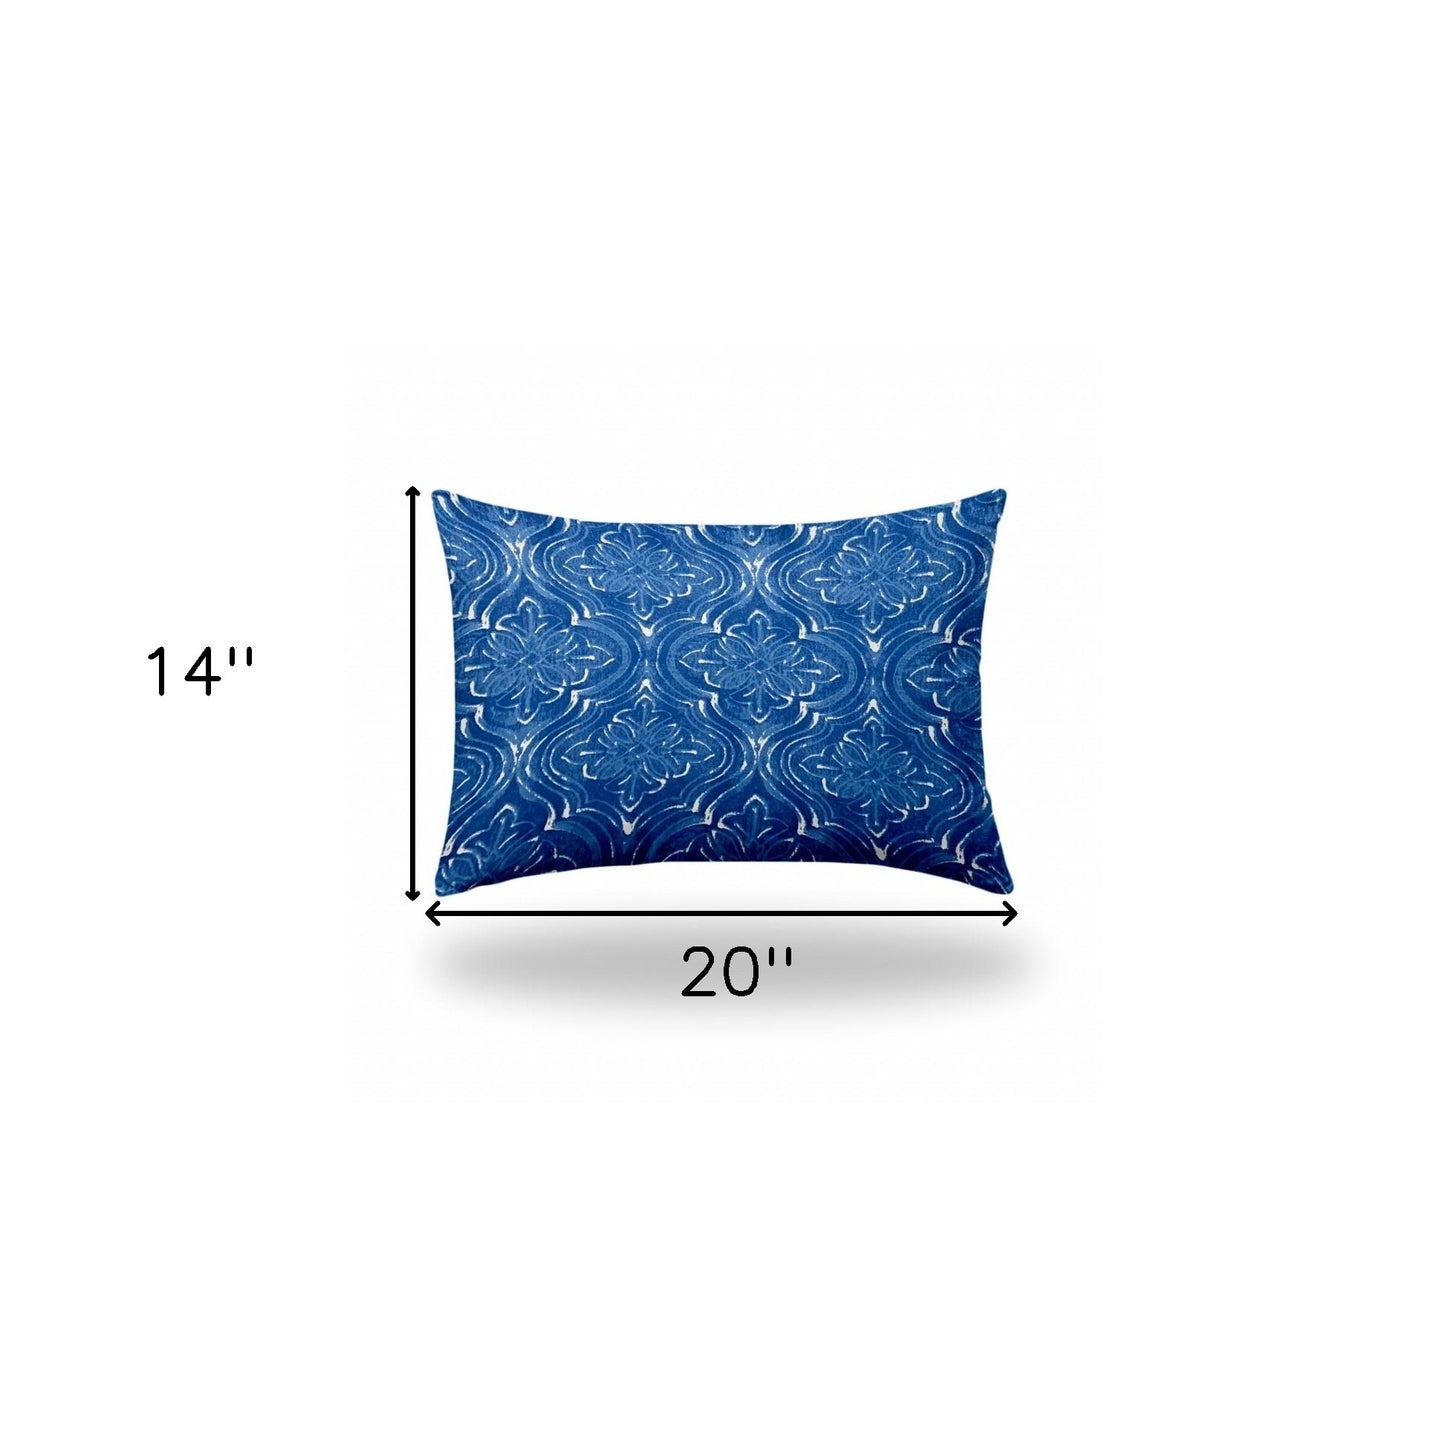 14" X 20" Blue And White Enveloped Ogee Lumbar Indoor Outdoor Pillow Cover